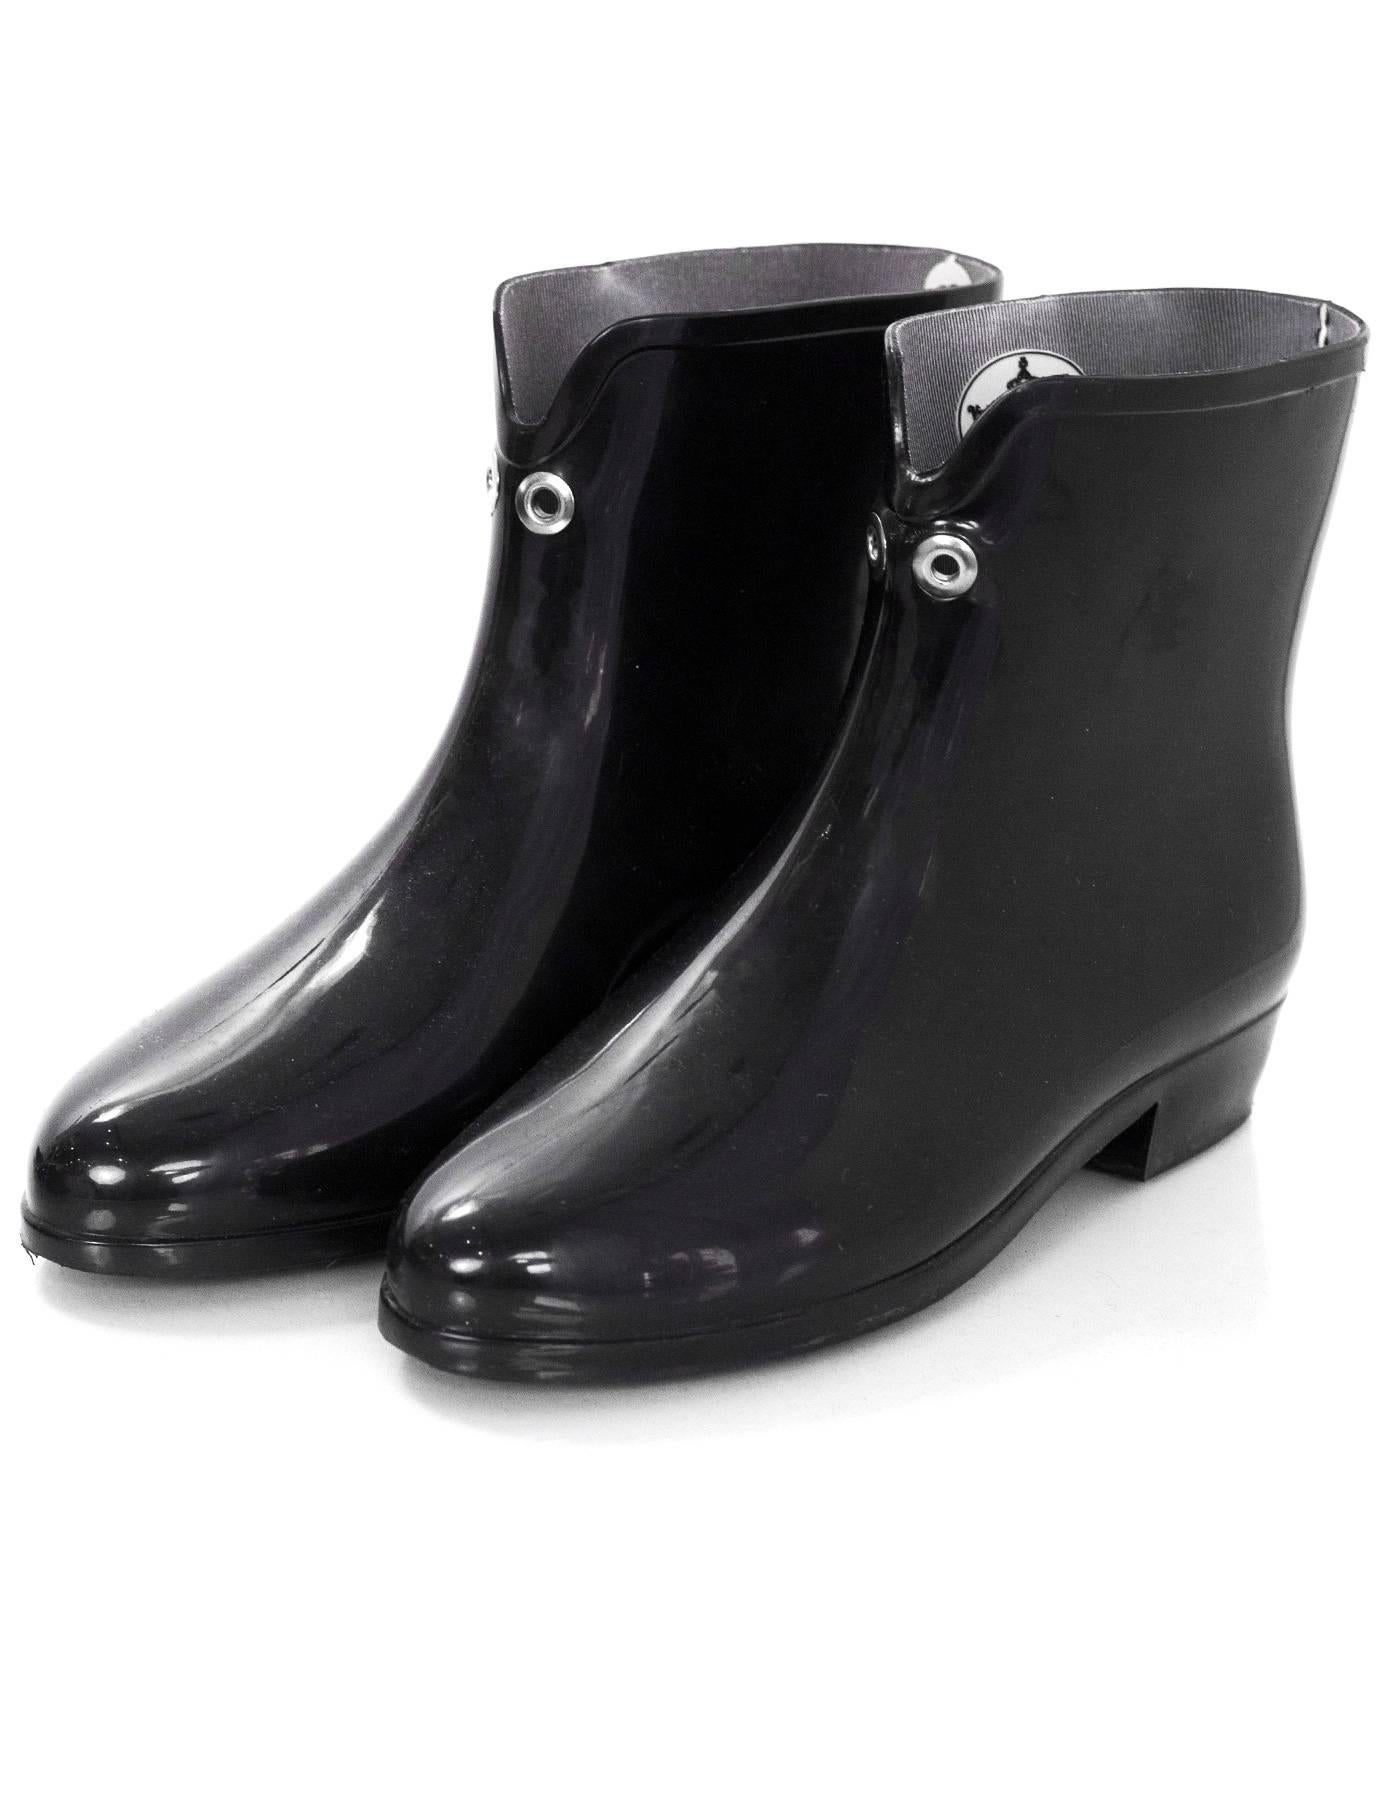 Vivienne Westwood Black Rubber Ankle Rain Boots Sz 37

Made In: Brazil
Color: Black 
Materials: Rubber
Closure/Opening: Pull on
Sole Stamp: Melissa 37 made in bazil
Overall Condition: Excellent pre-owned condition, light wear at outsoles
Marked